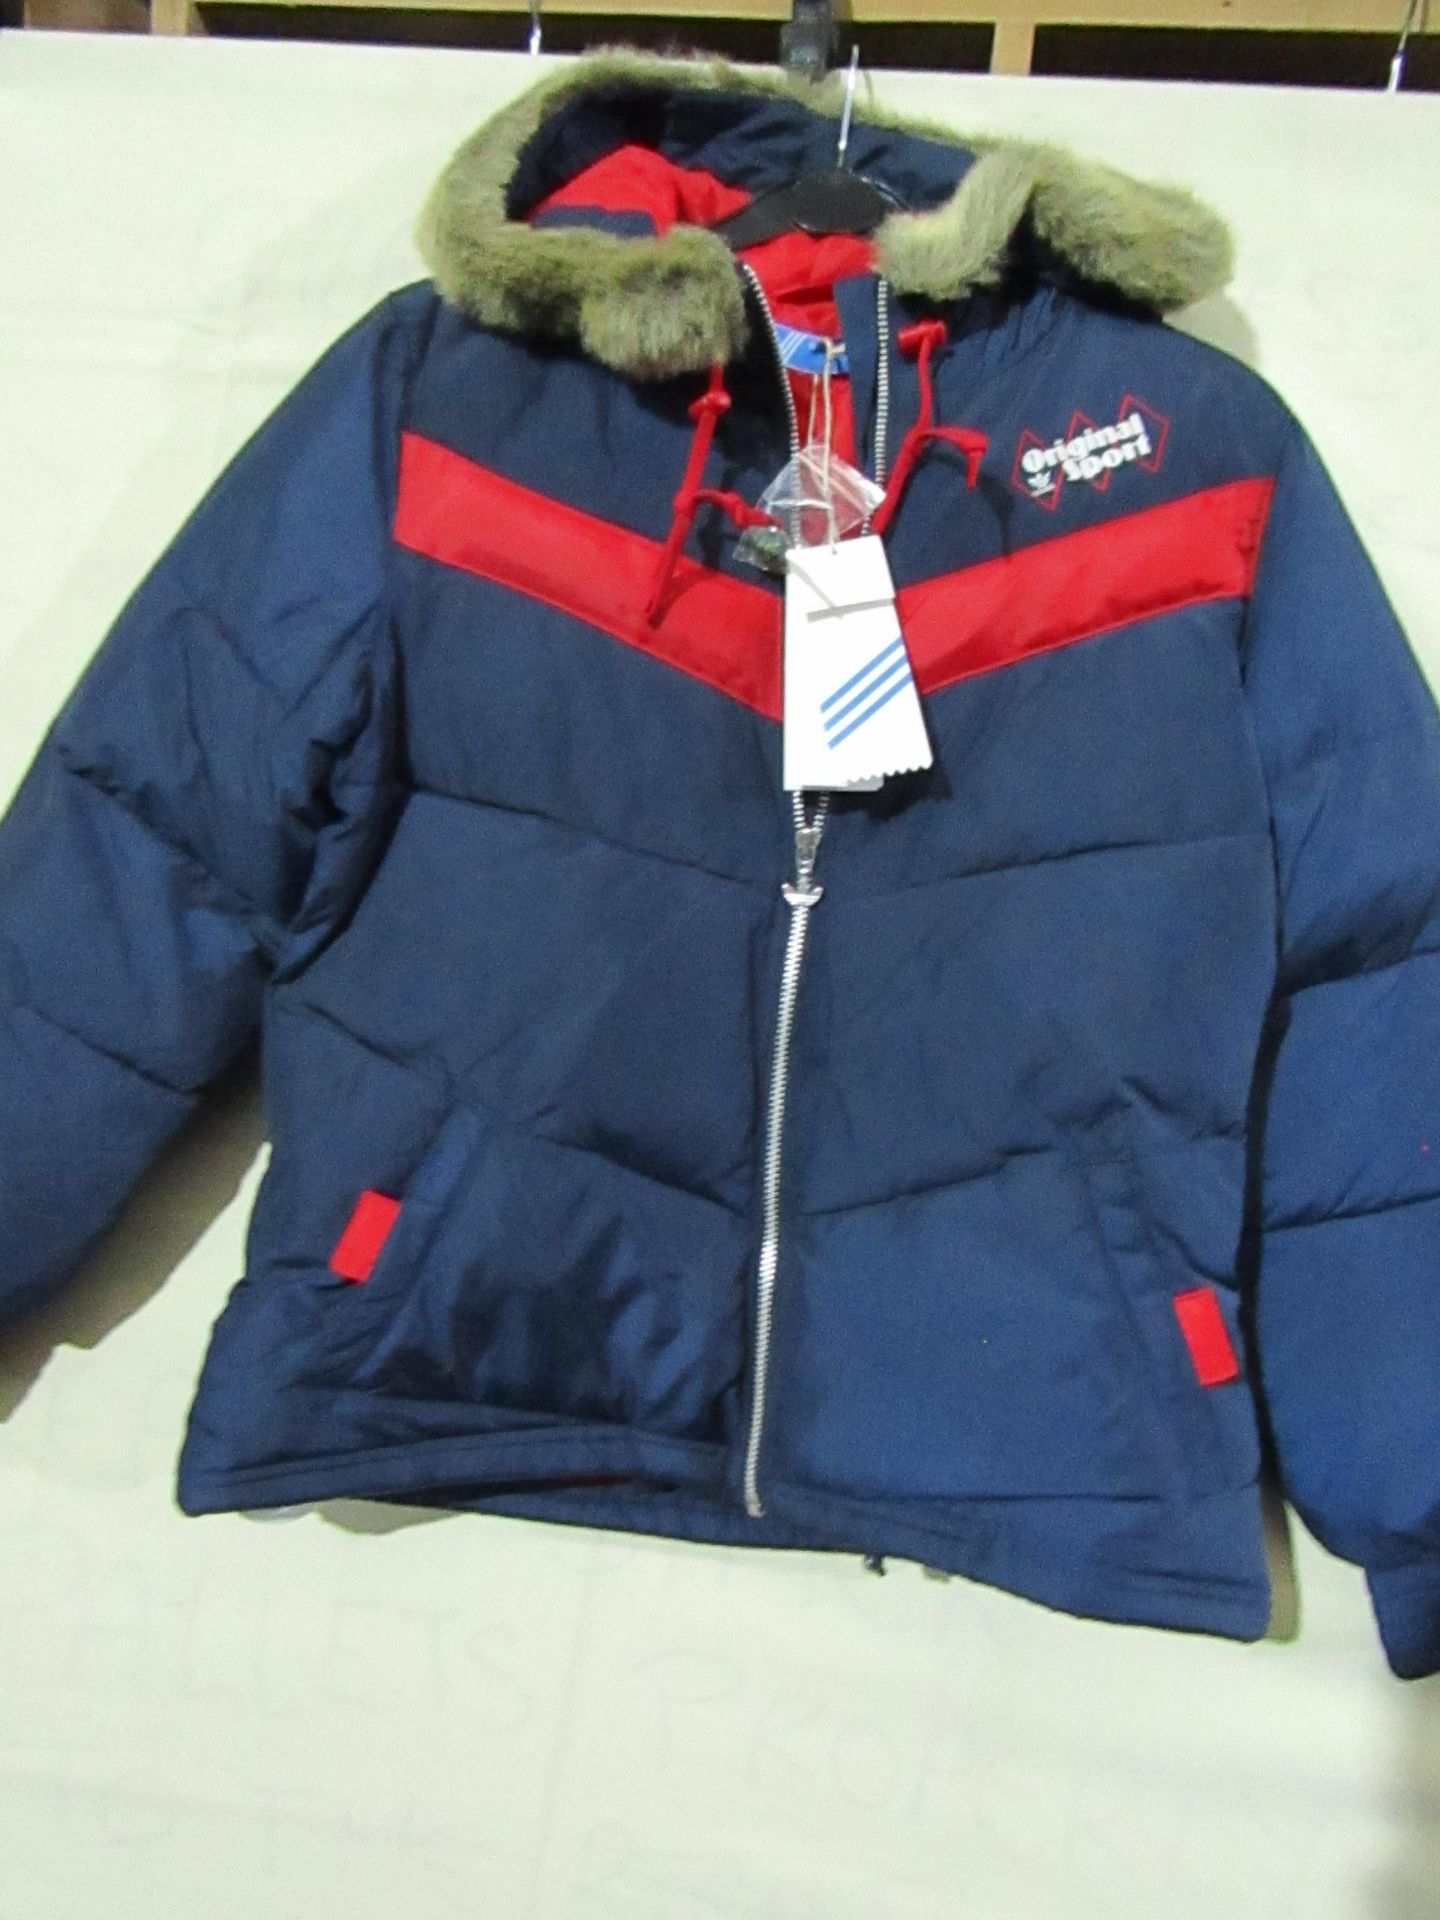 Adidas Jacket Ladies Petite Size L Navy/Red New With Tags ( Please Note These Jackets Are Petite